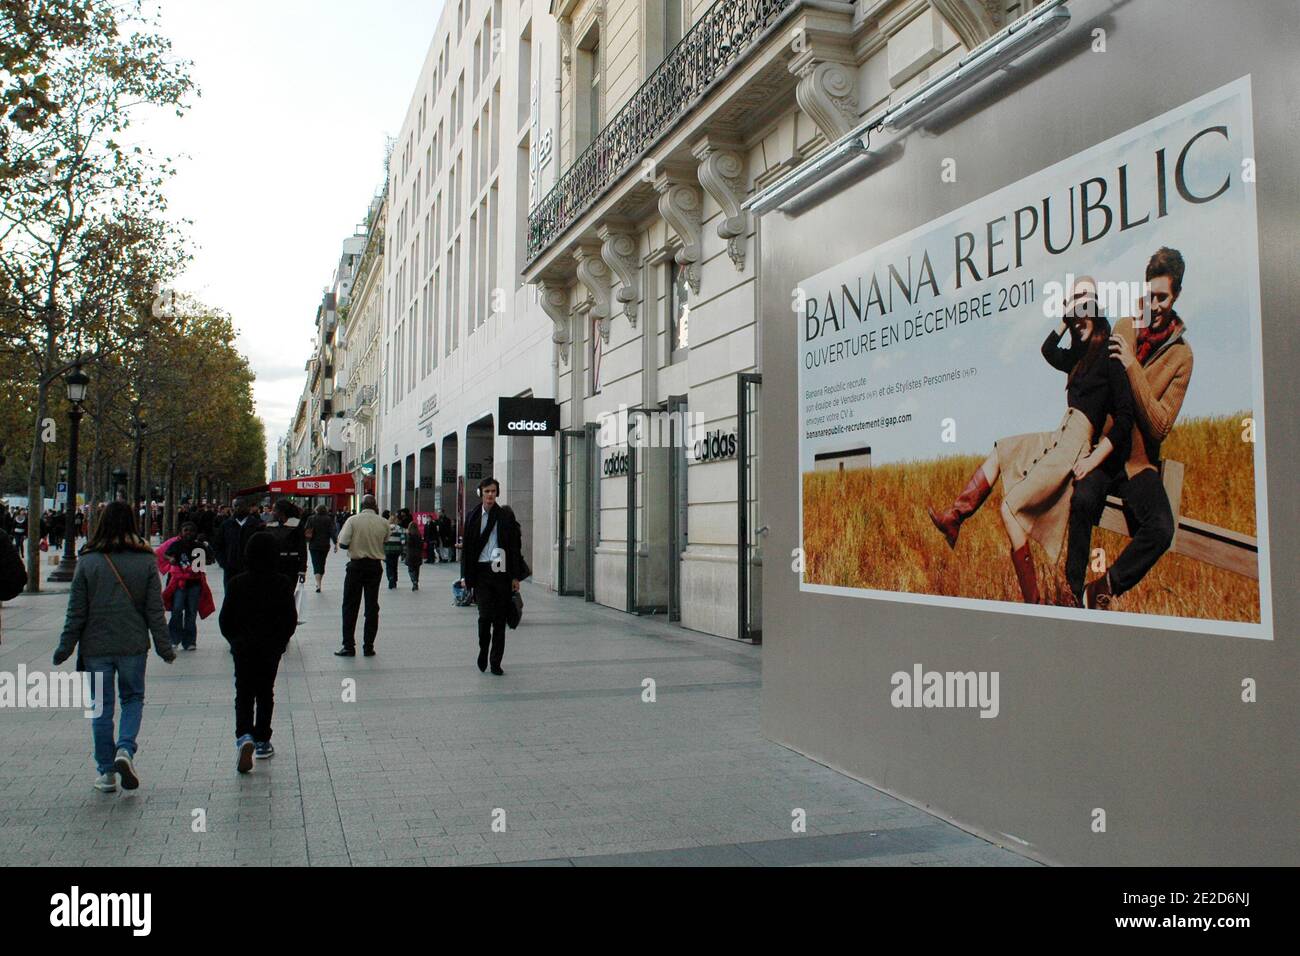 A billboard announces the opening in early December 2011 of the first  Banana Republic store in France, on the Champs-Elysees in Paris, France on  October 26, 2011. The new store is part